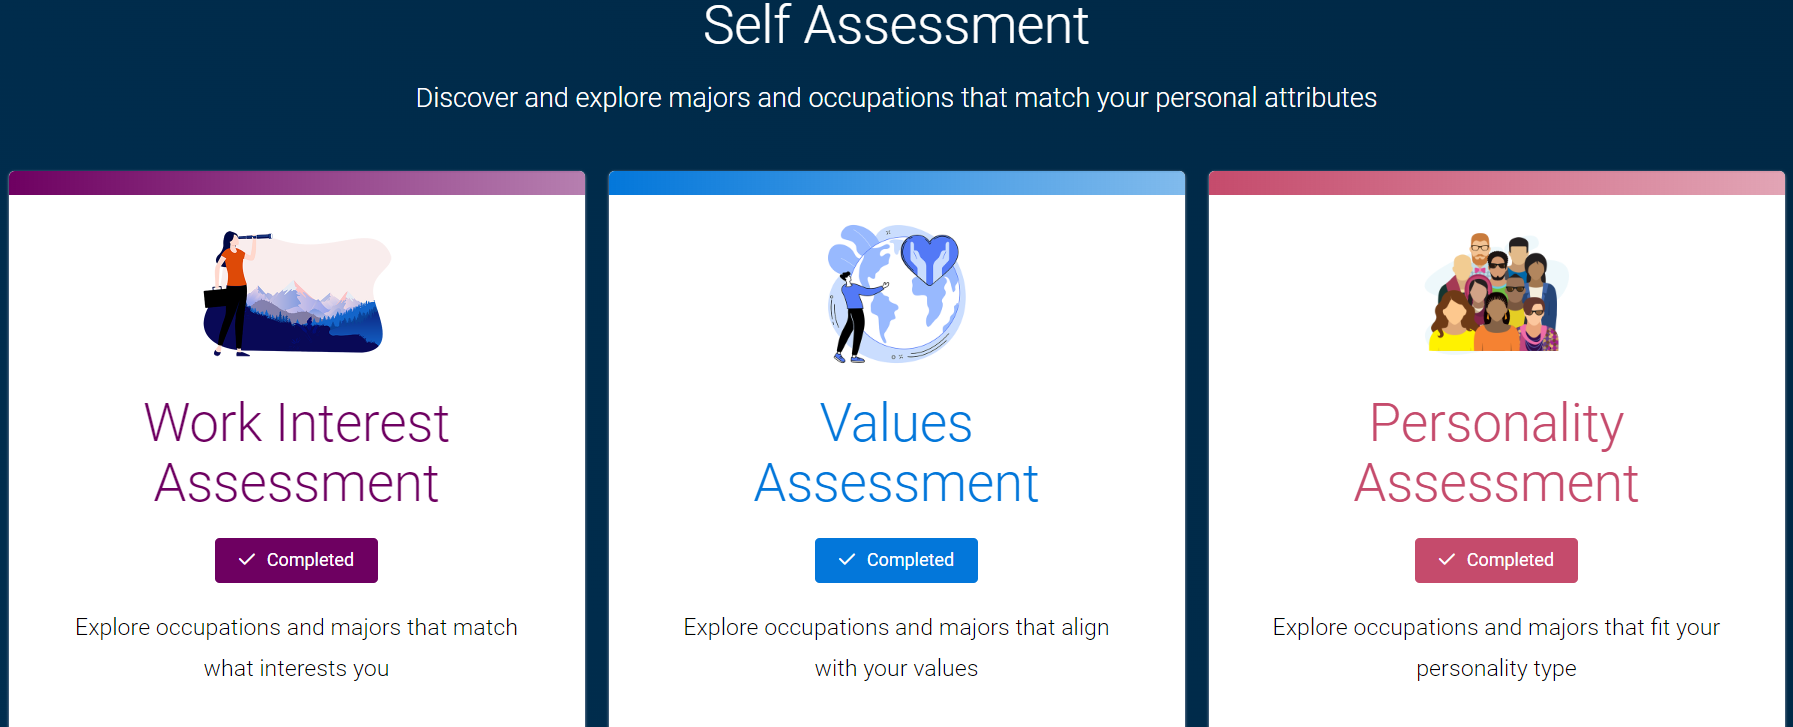 "Self Assessment" section in FOCUS2